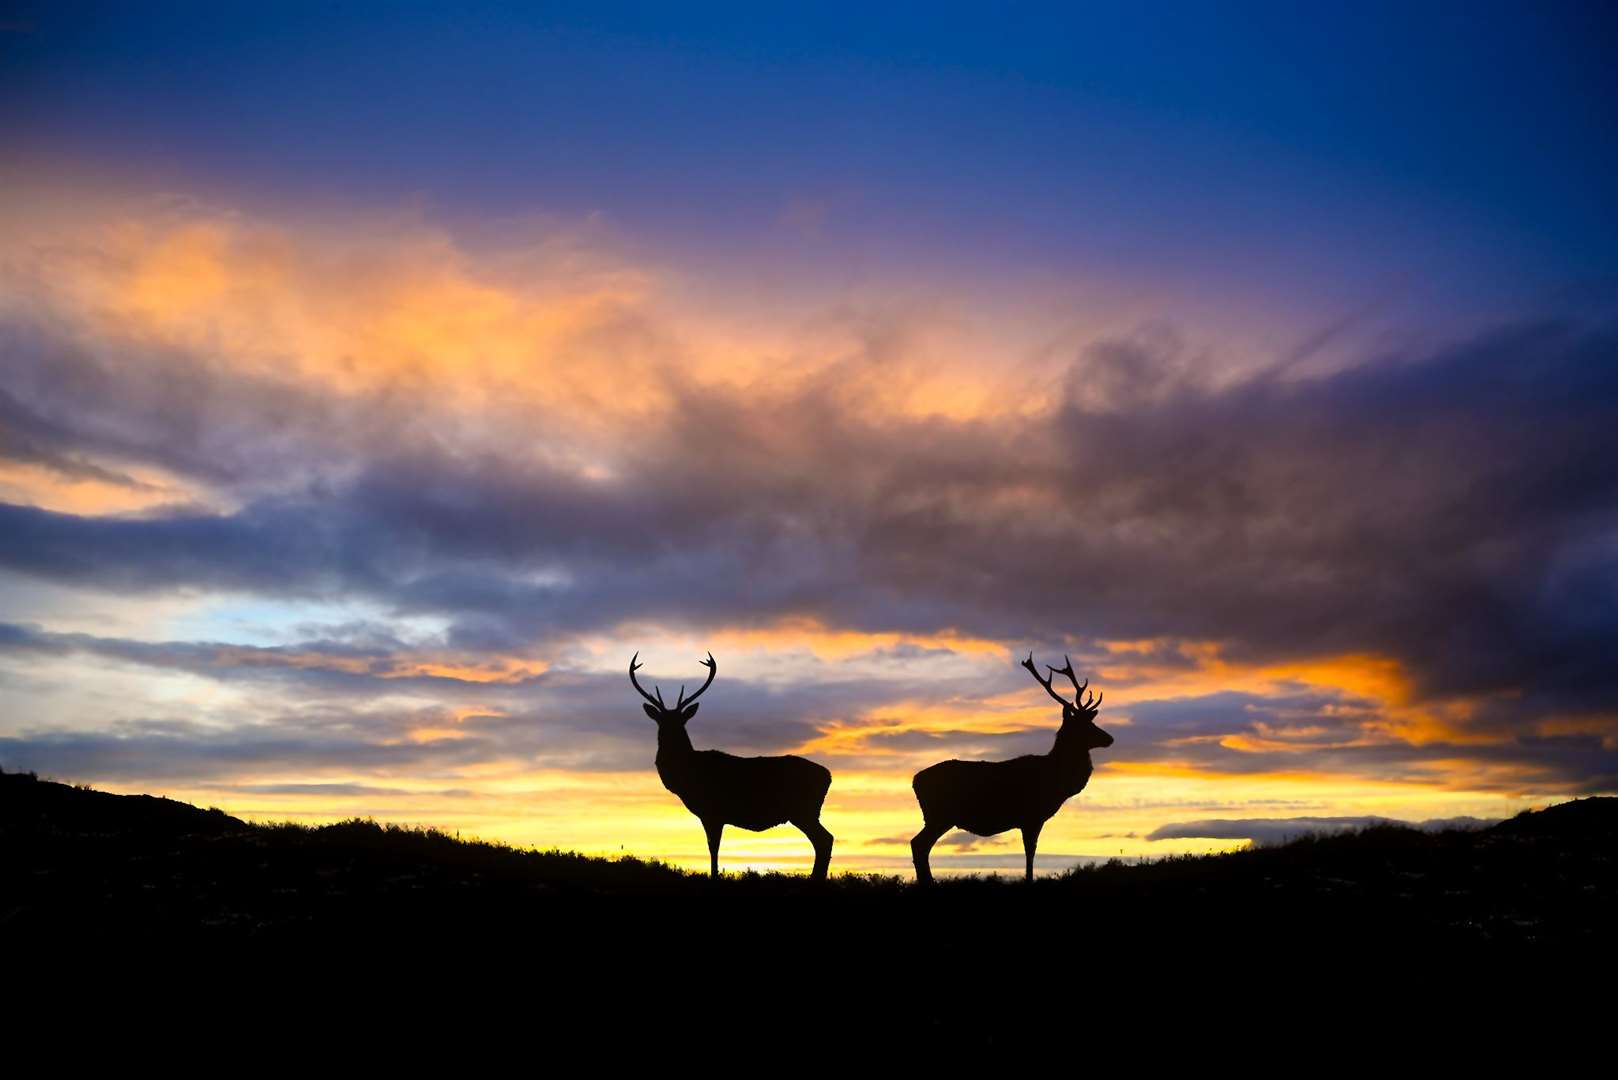 Two stags in Sanjay's photo